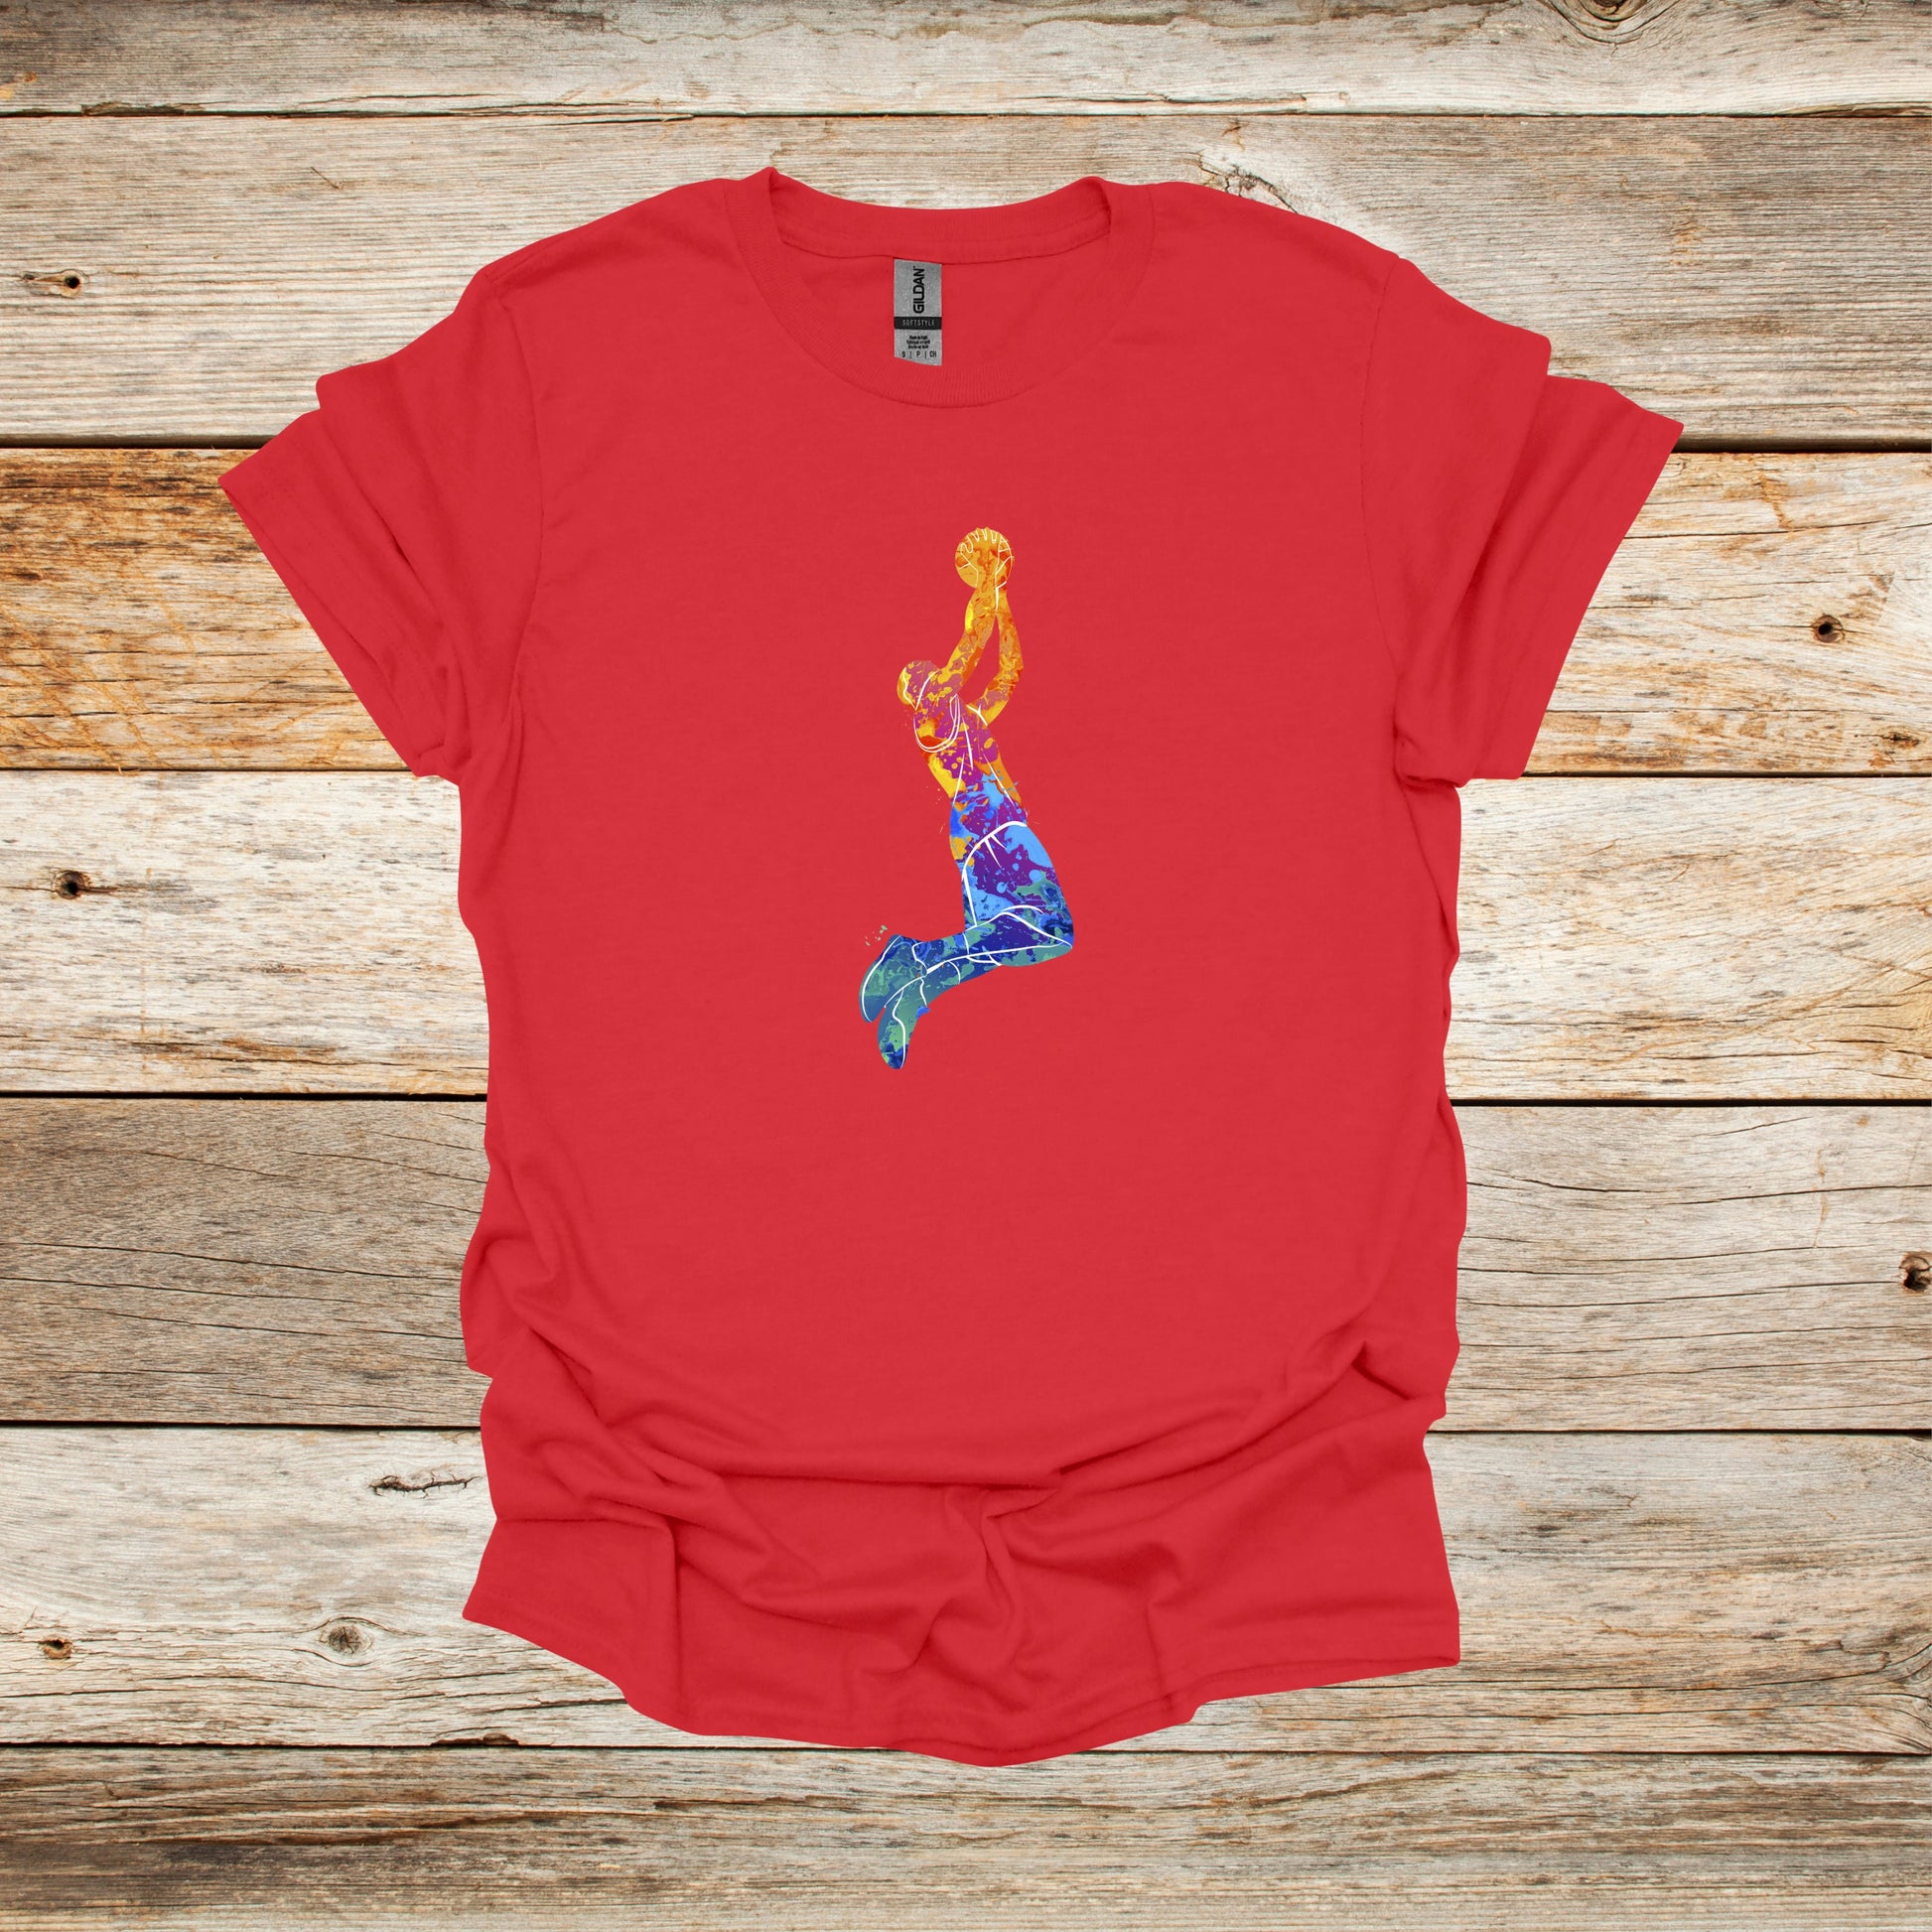 Basketball T-Shirt - Jump Shot - Adult and Children's Tee Shirts - Sports T-Shirts Graphic Avenue Red Adult Small 